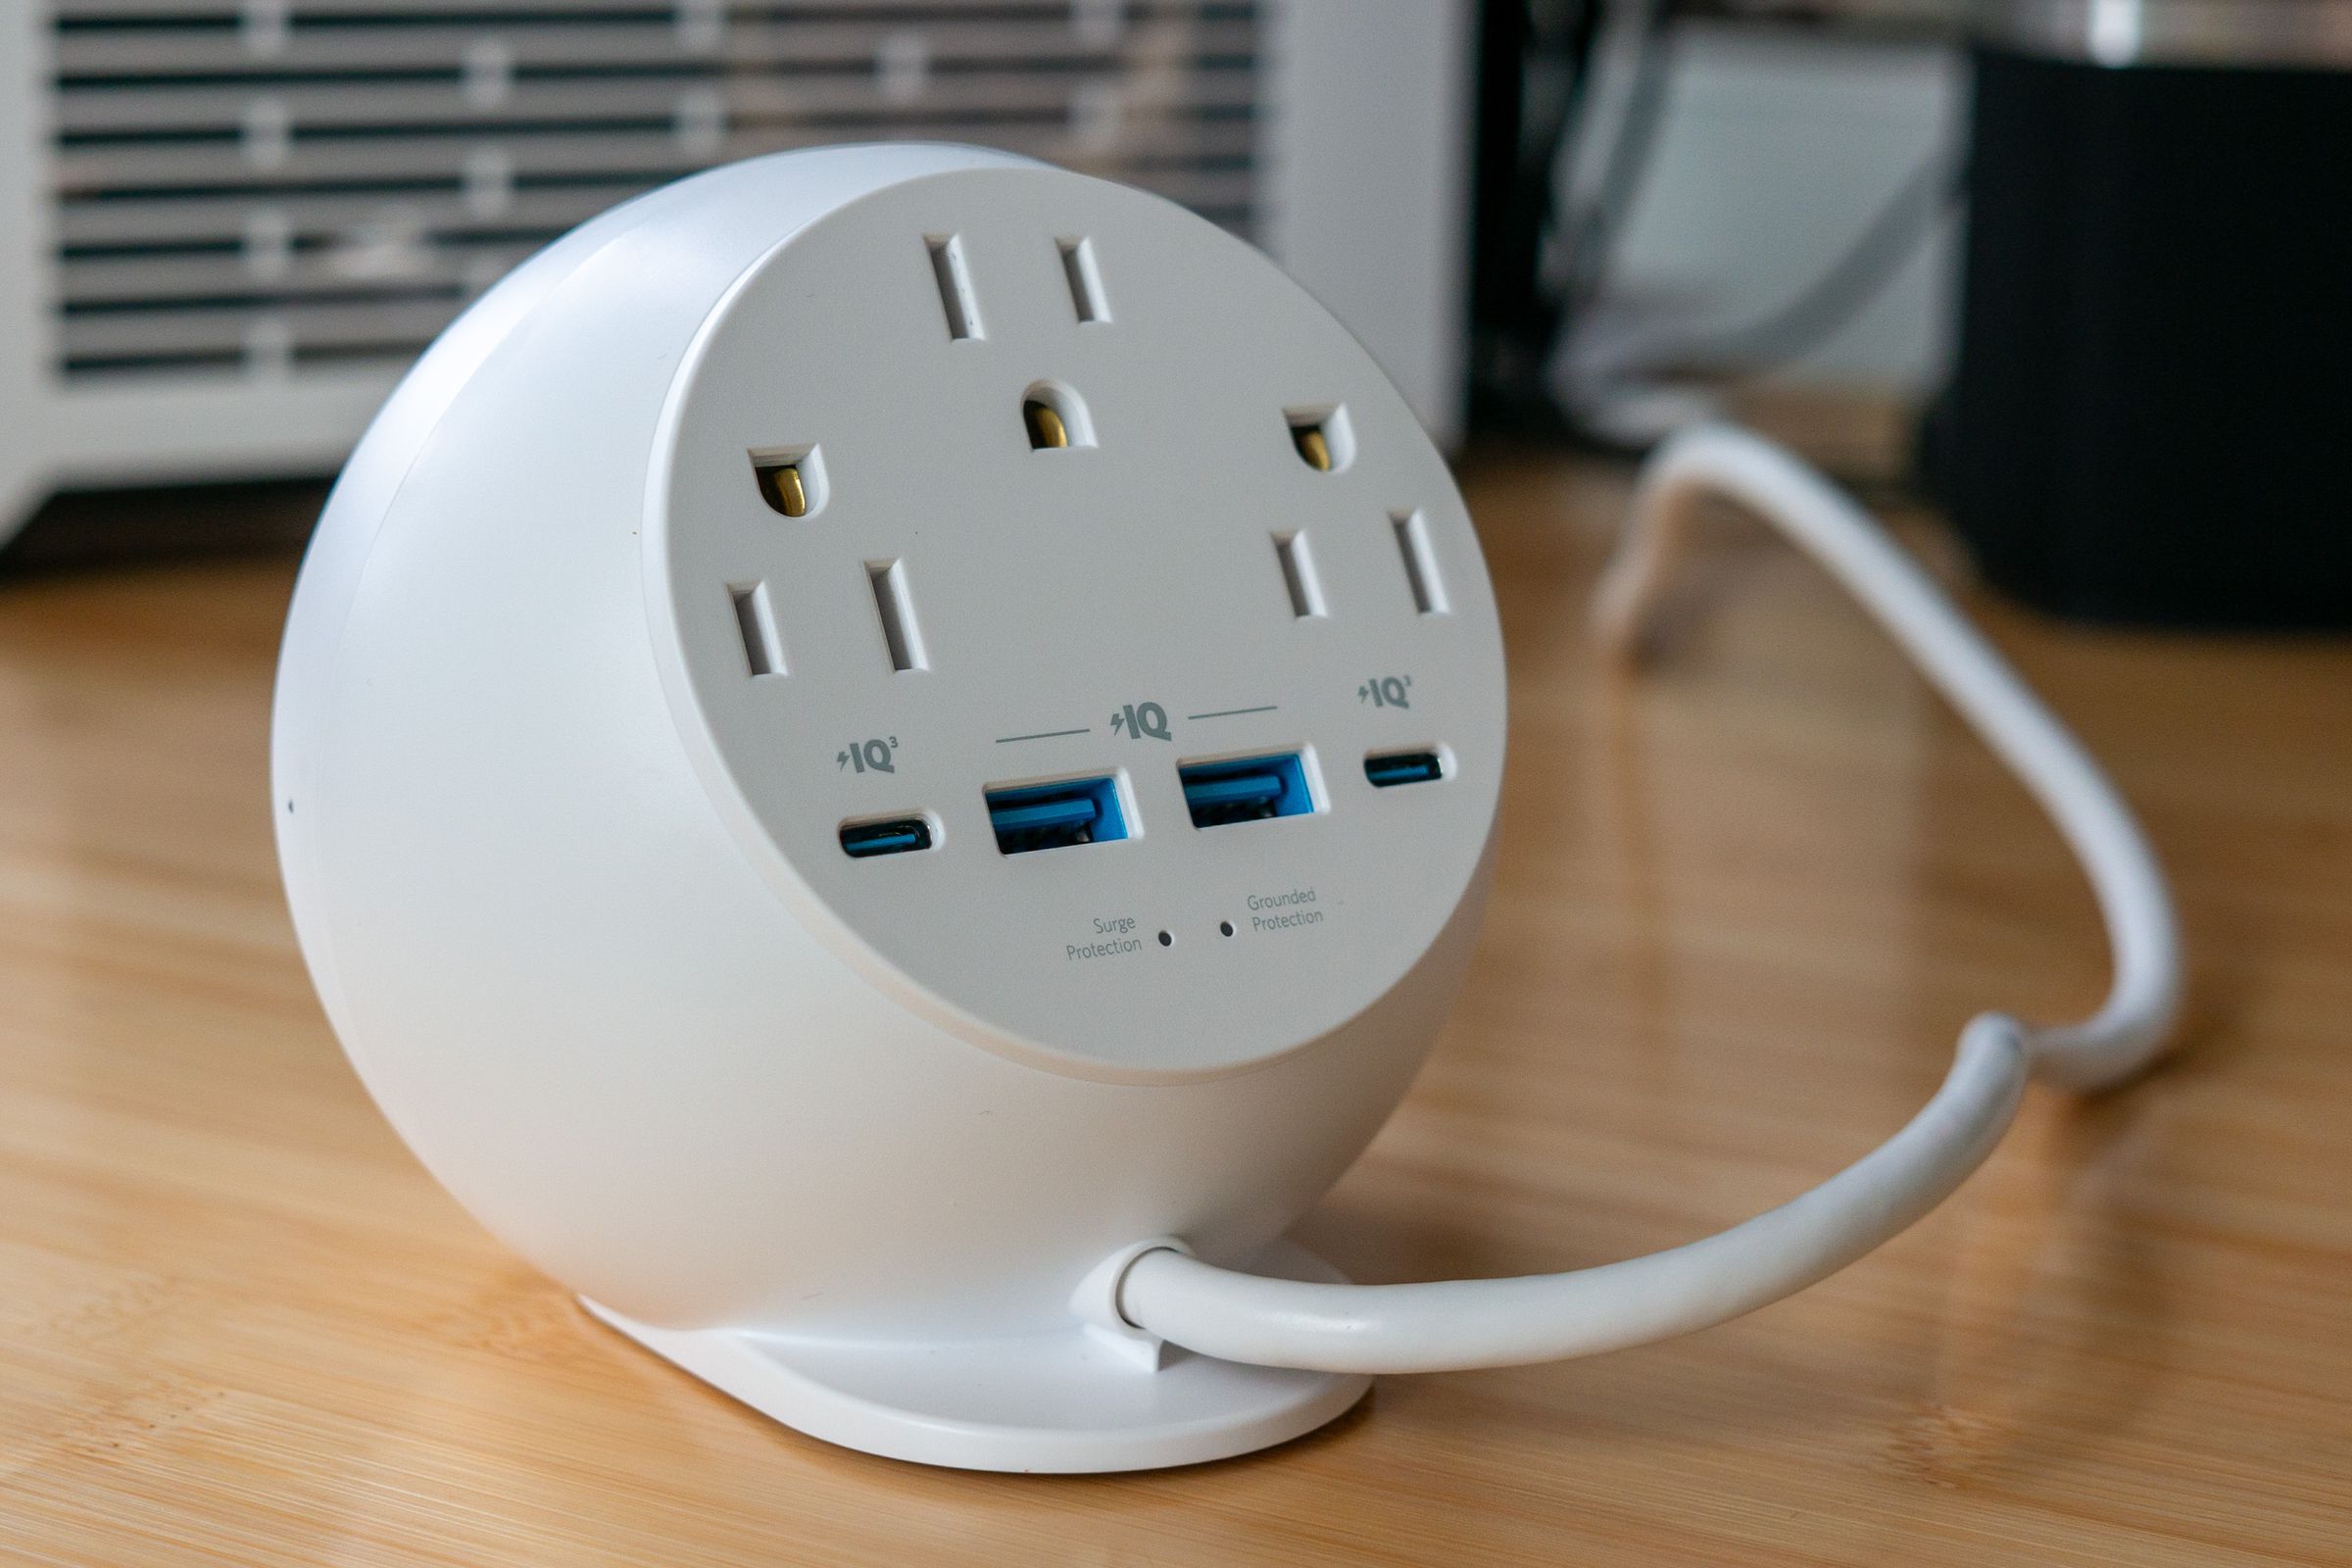 Rear view of the Anker 8-in-1 orb showing three AC outlets, two USB-A, and two USB-C ports.